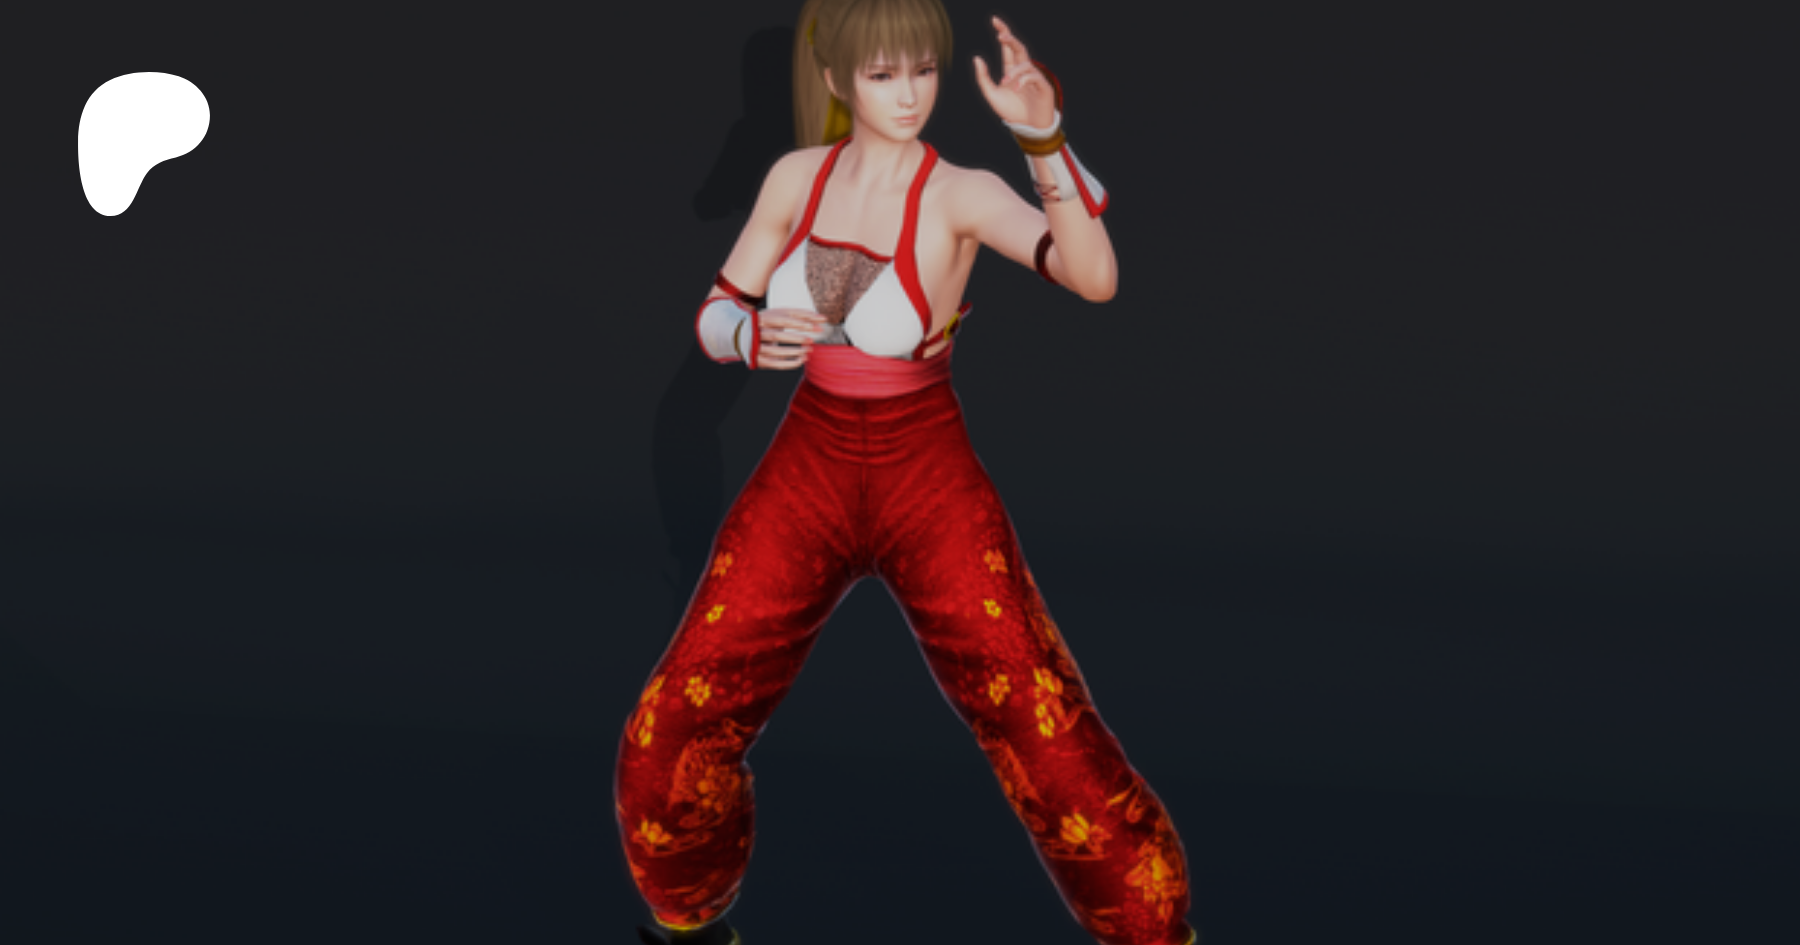 Dead Or Alive 5 Last Round Kasumi Dead Or Alive 3 DOA: Dead Or Alive PNG